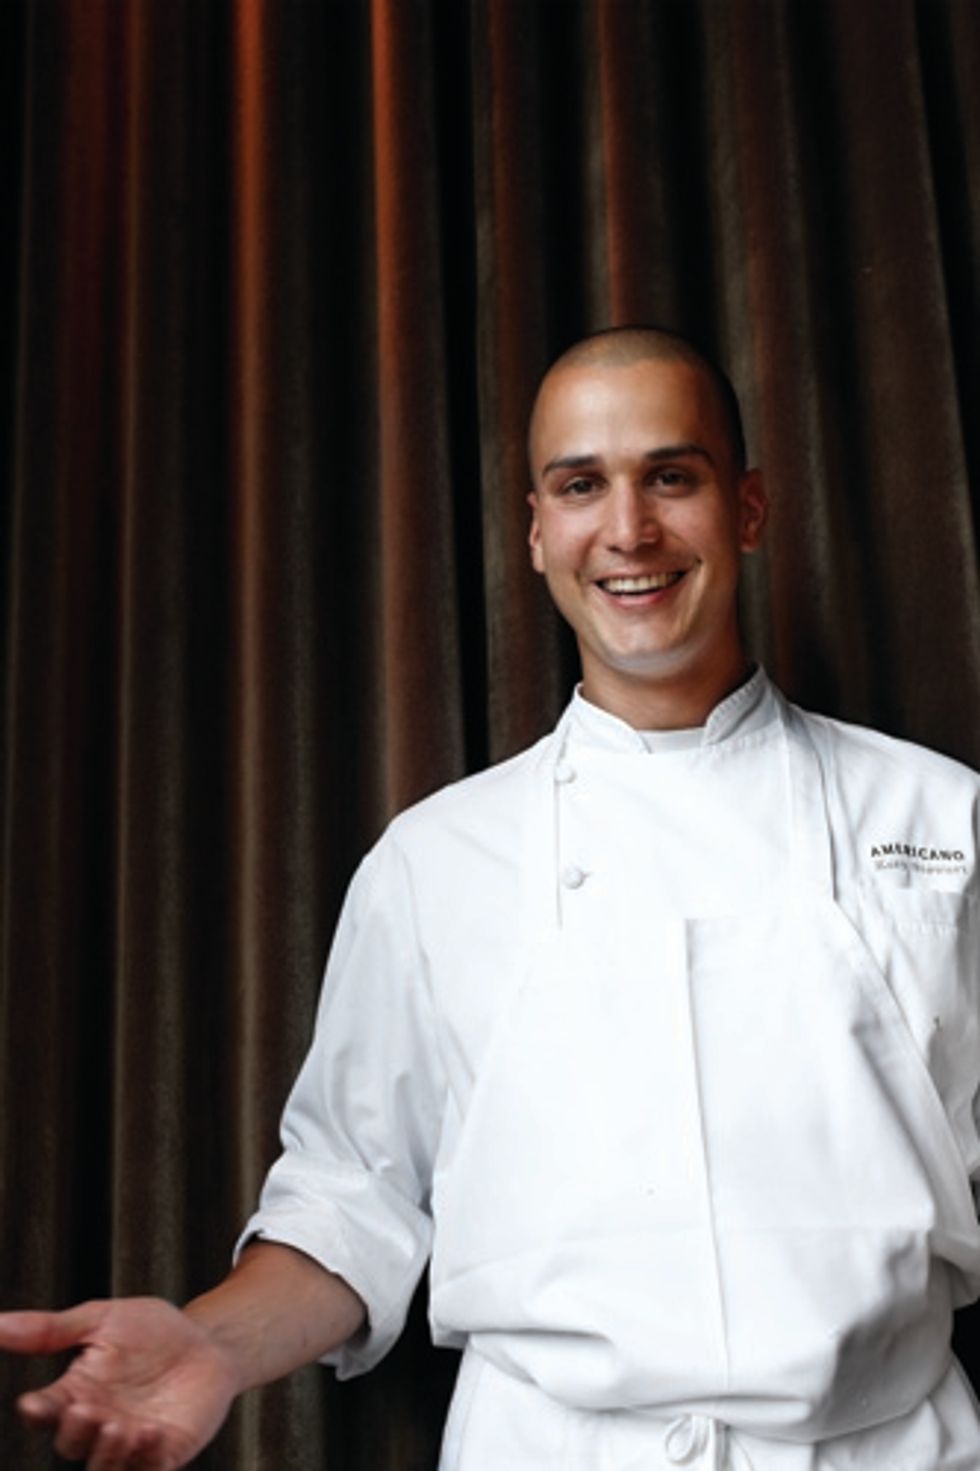 7x7's fans chose chef Kory Stewart to be the winner of our first-ever "Your City, Your Chef" contest!